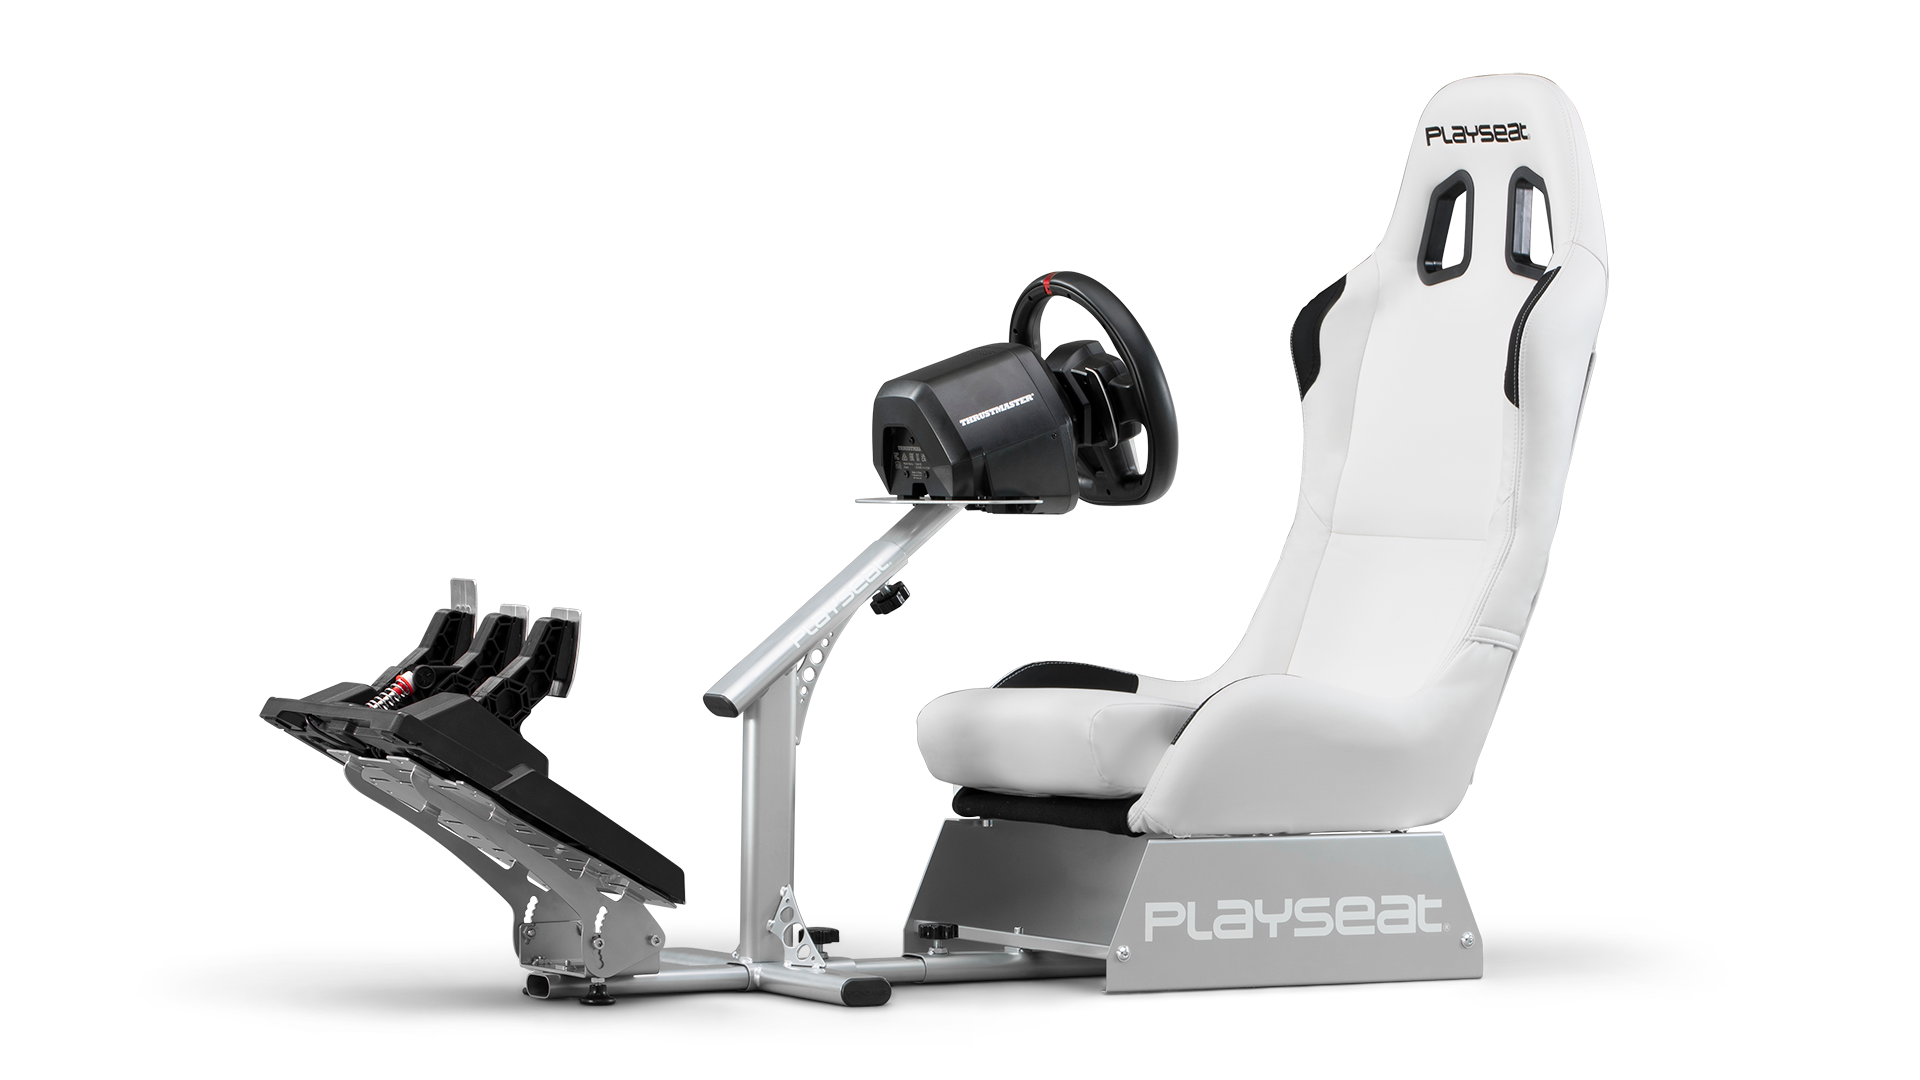 playseat-evolution-white-racing-simulator-front-angle-view-thrustmaster-1920x1080-2.png